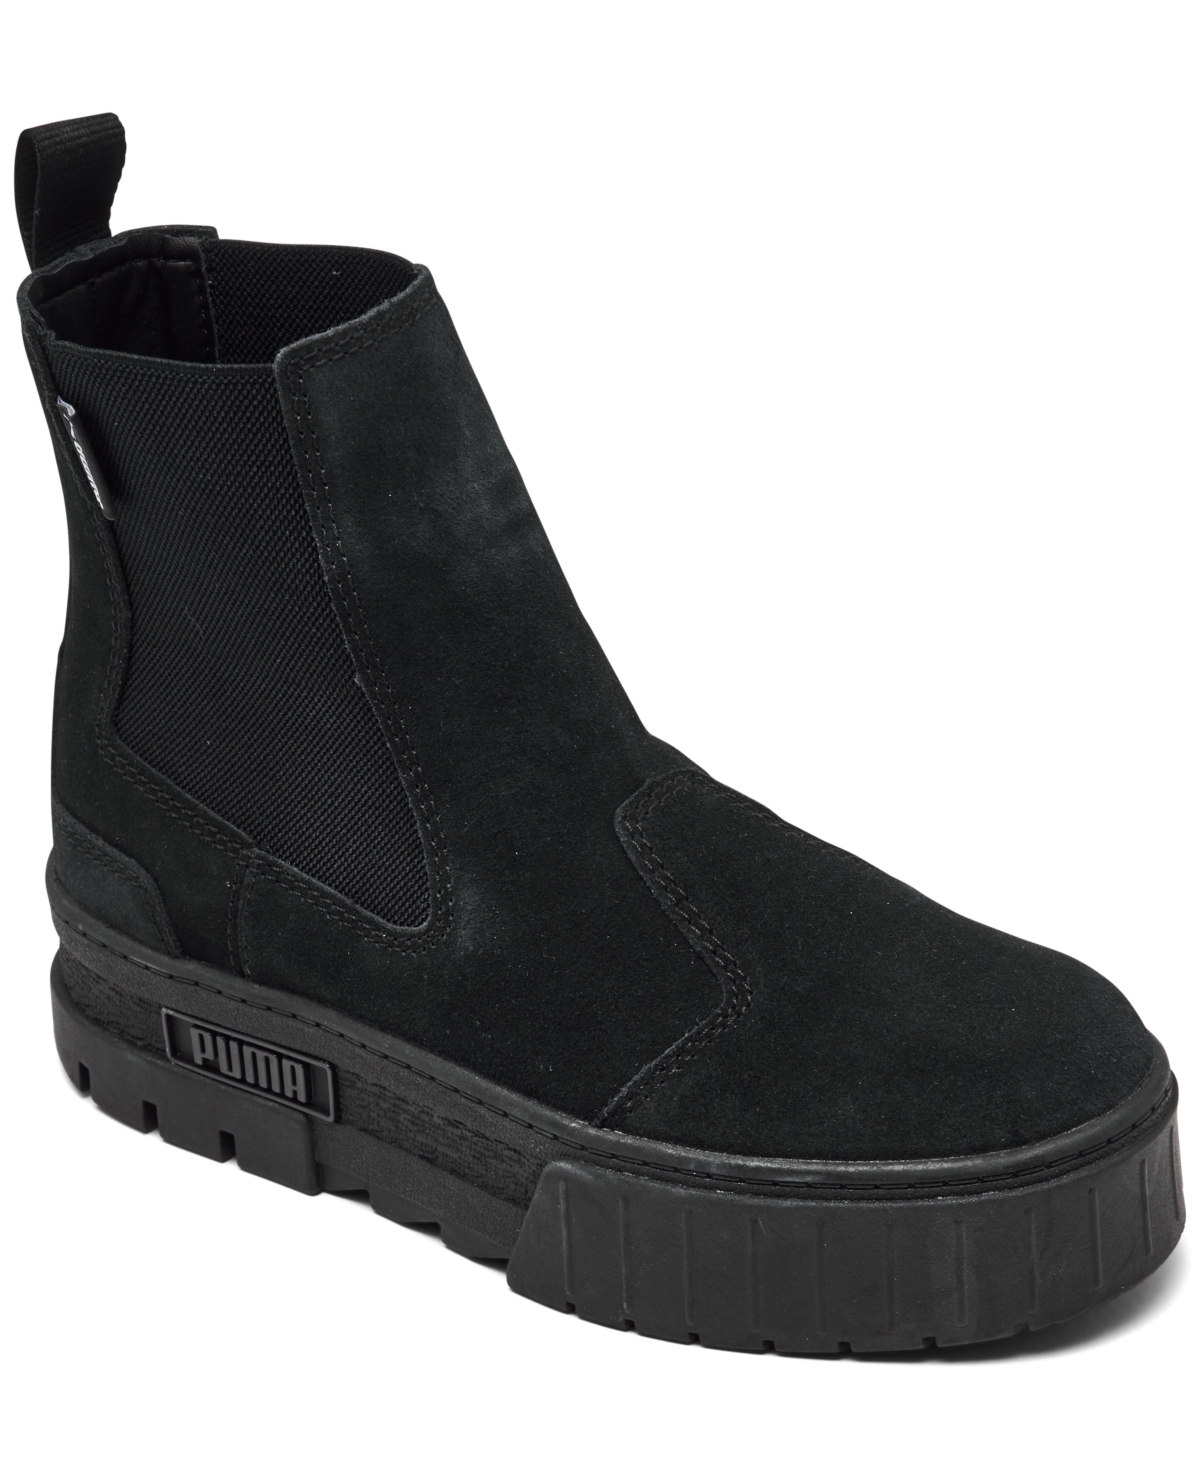 Más allá pasos Pantano Puma Women's Mayze Suede Chelsea Boots from Finish Line - Macy's